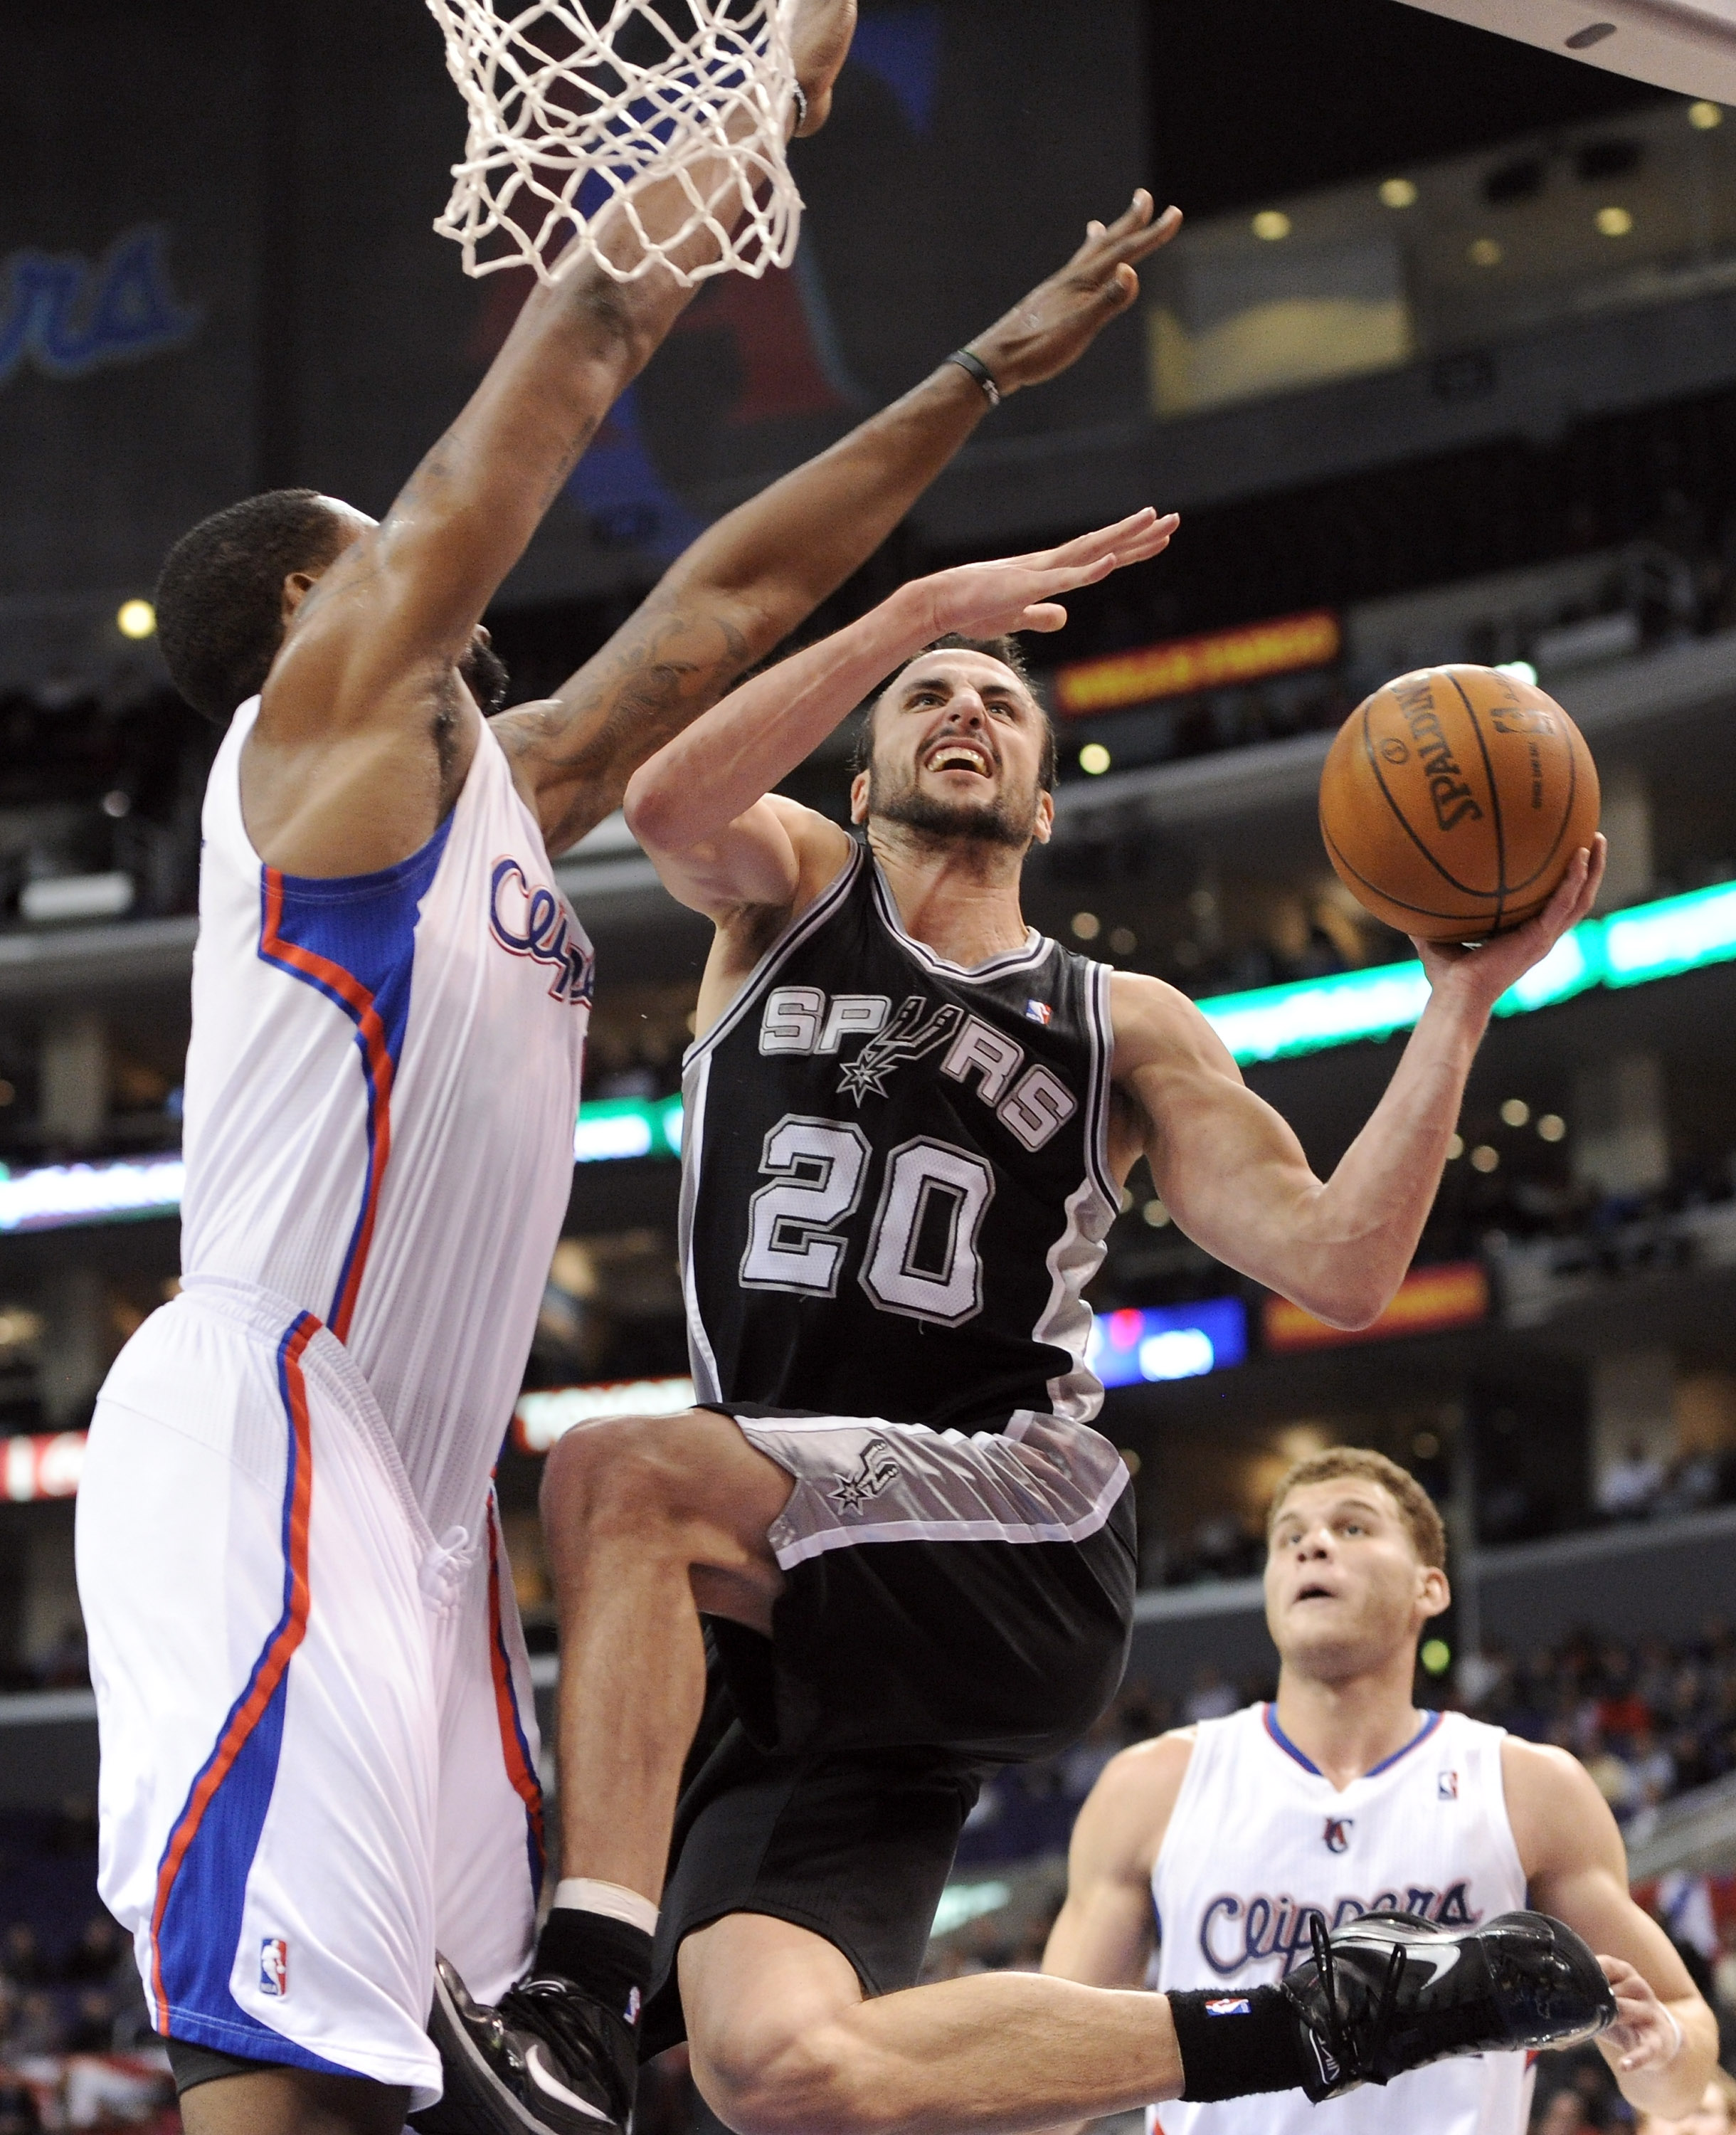 LOS ANGELES, CA - DECEMBER 01:  Manu Ginobili #20 of the San Antonio Spurs drives on DeAndre Jordan #9 of the Los Angeles Clippers during the game at the Staples Center on December 1, 2010 in Los Angeles, California.  NOTE TO USER: User expressly acknowle